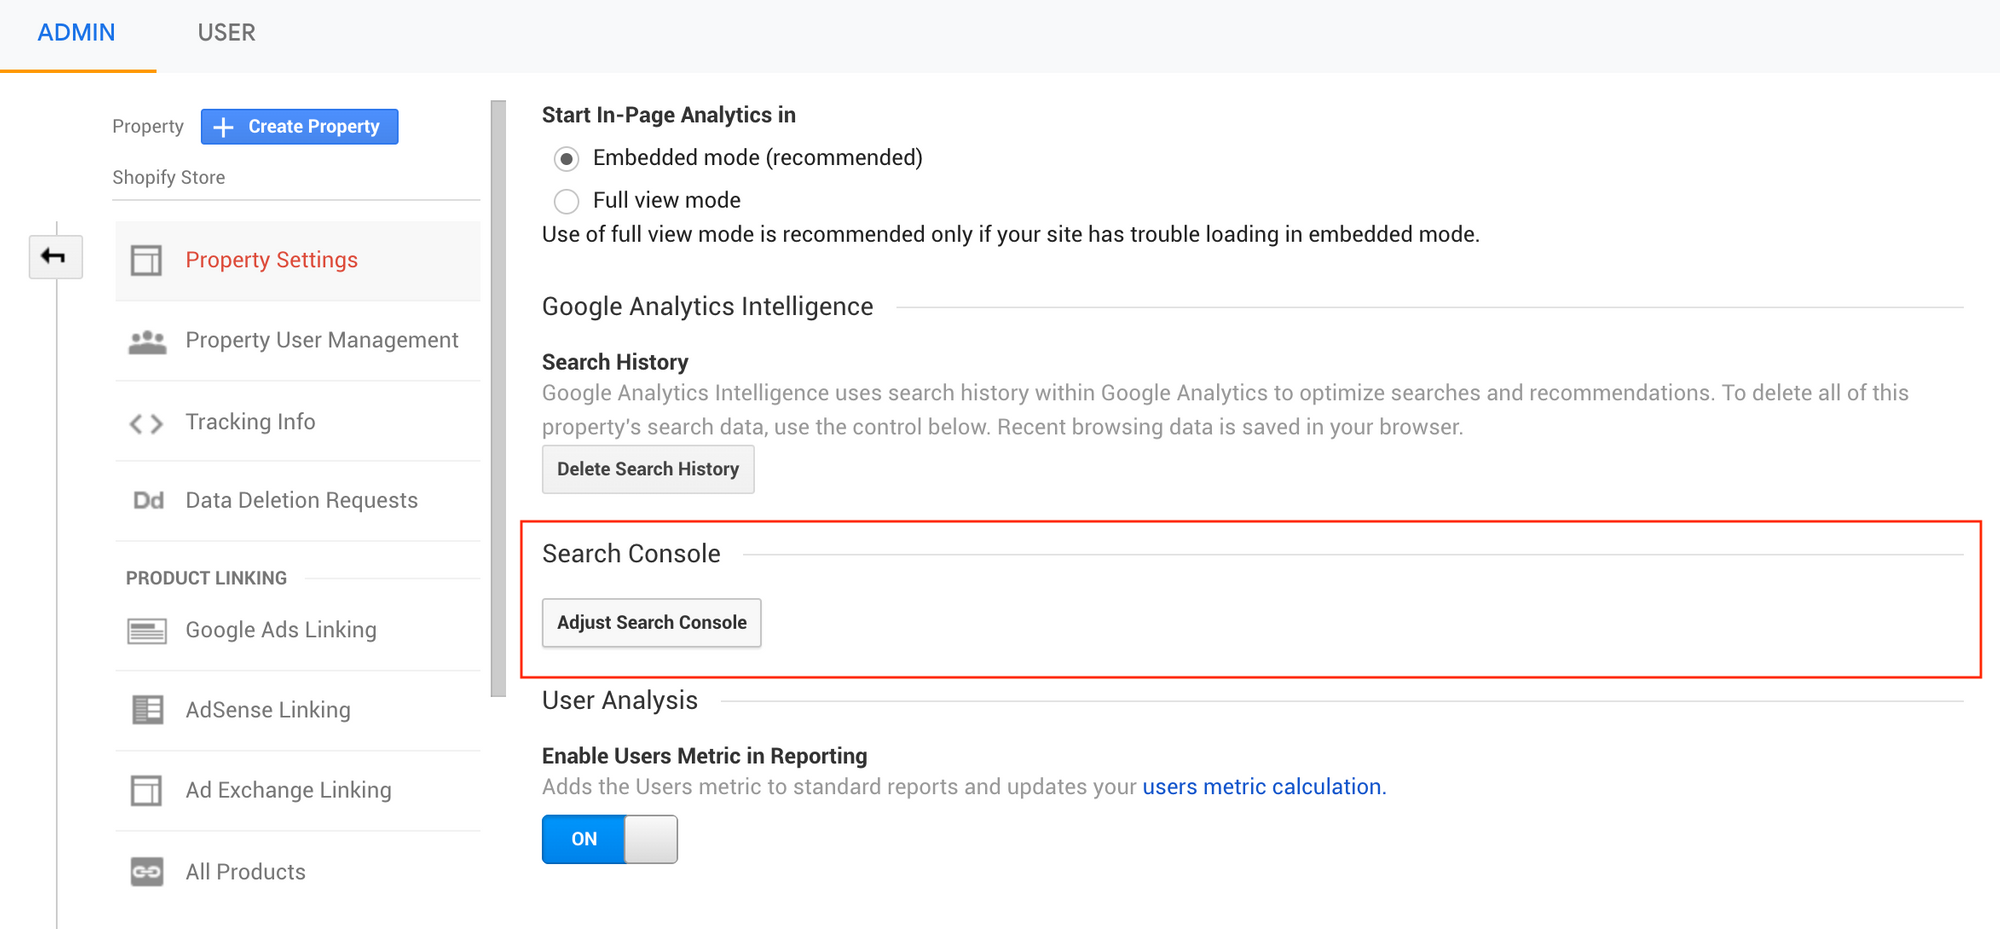 Linking Google Analytics with Google Search Console in the GA admin panel